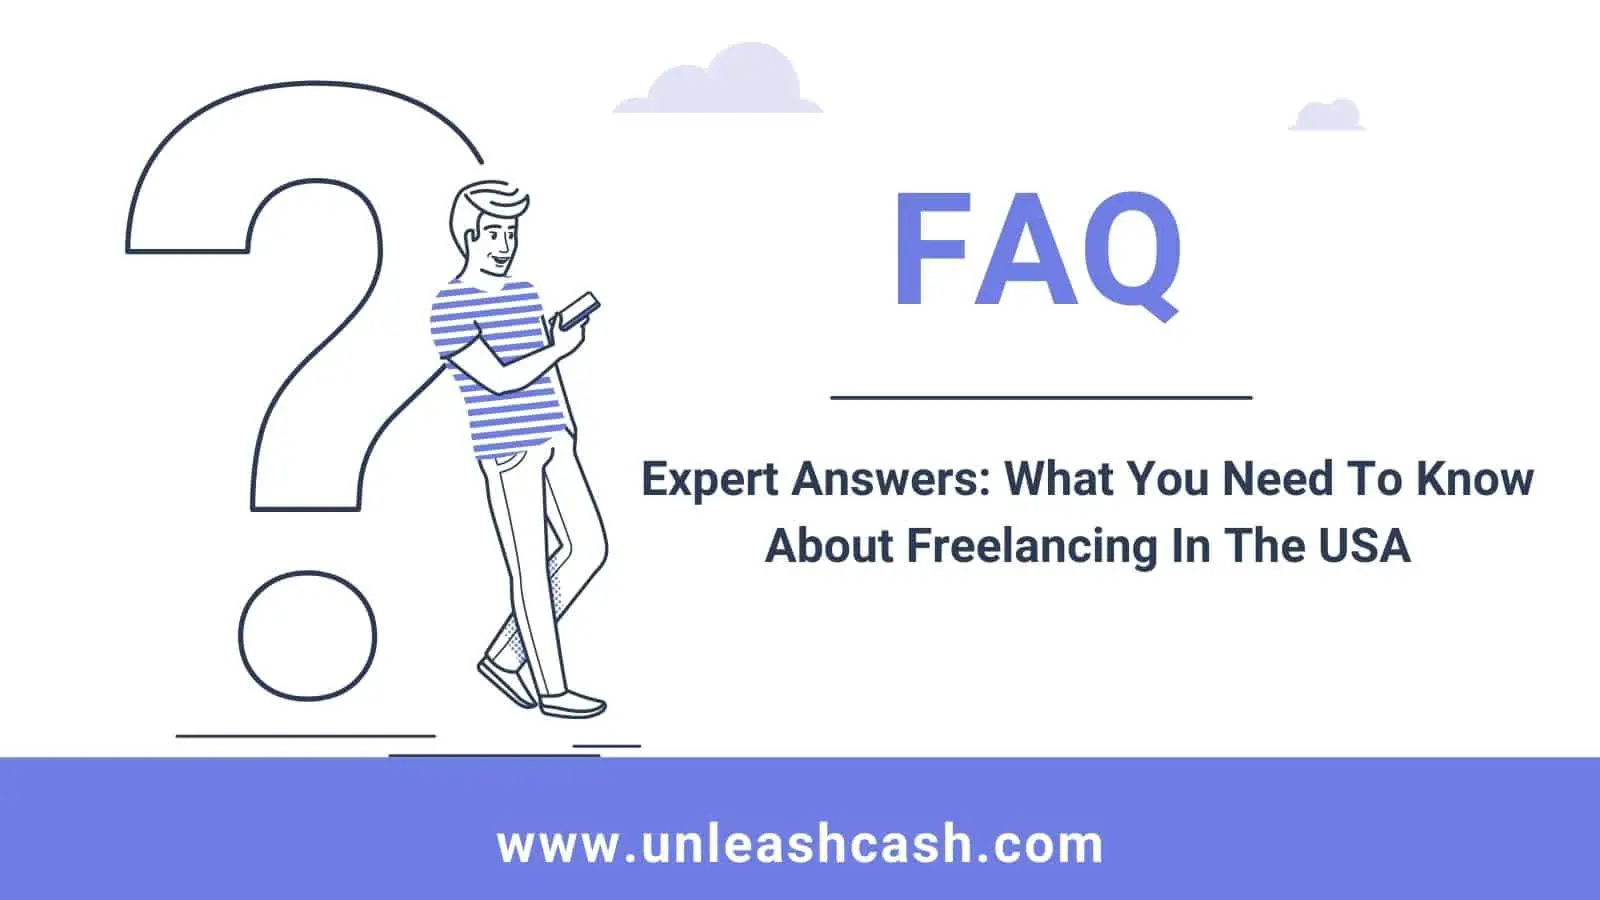 Expert Answers: What You Need To Know About Freelancing In The USA